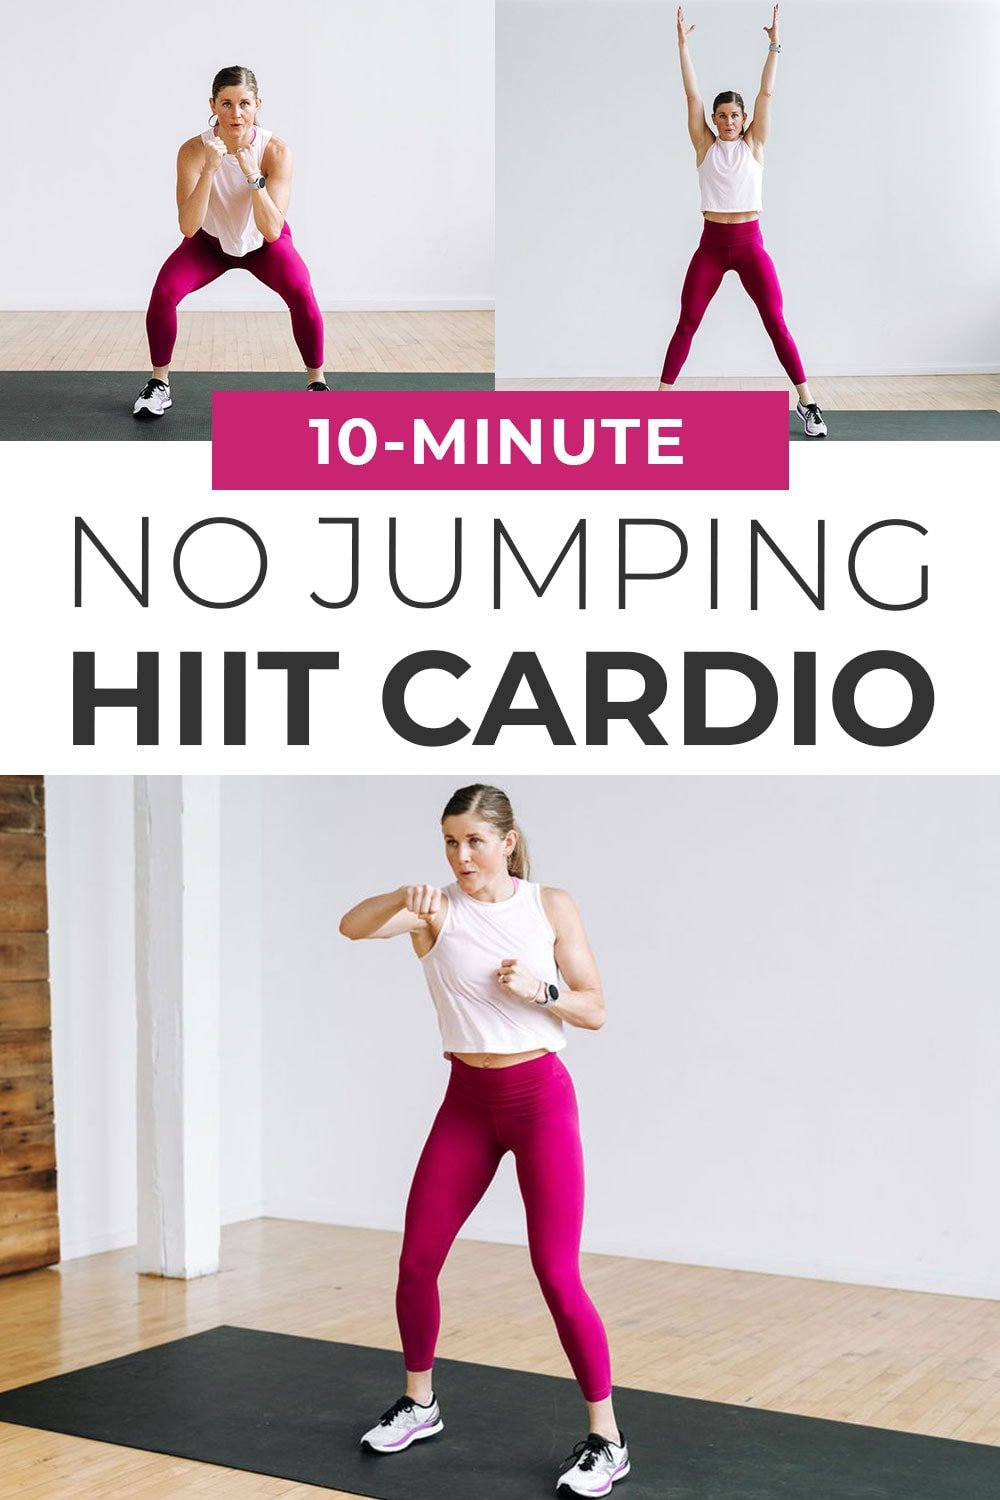 15 Minute Aerobic Workout At Home For Beginners with Comfort Workout Clothes